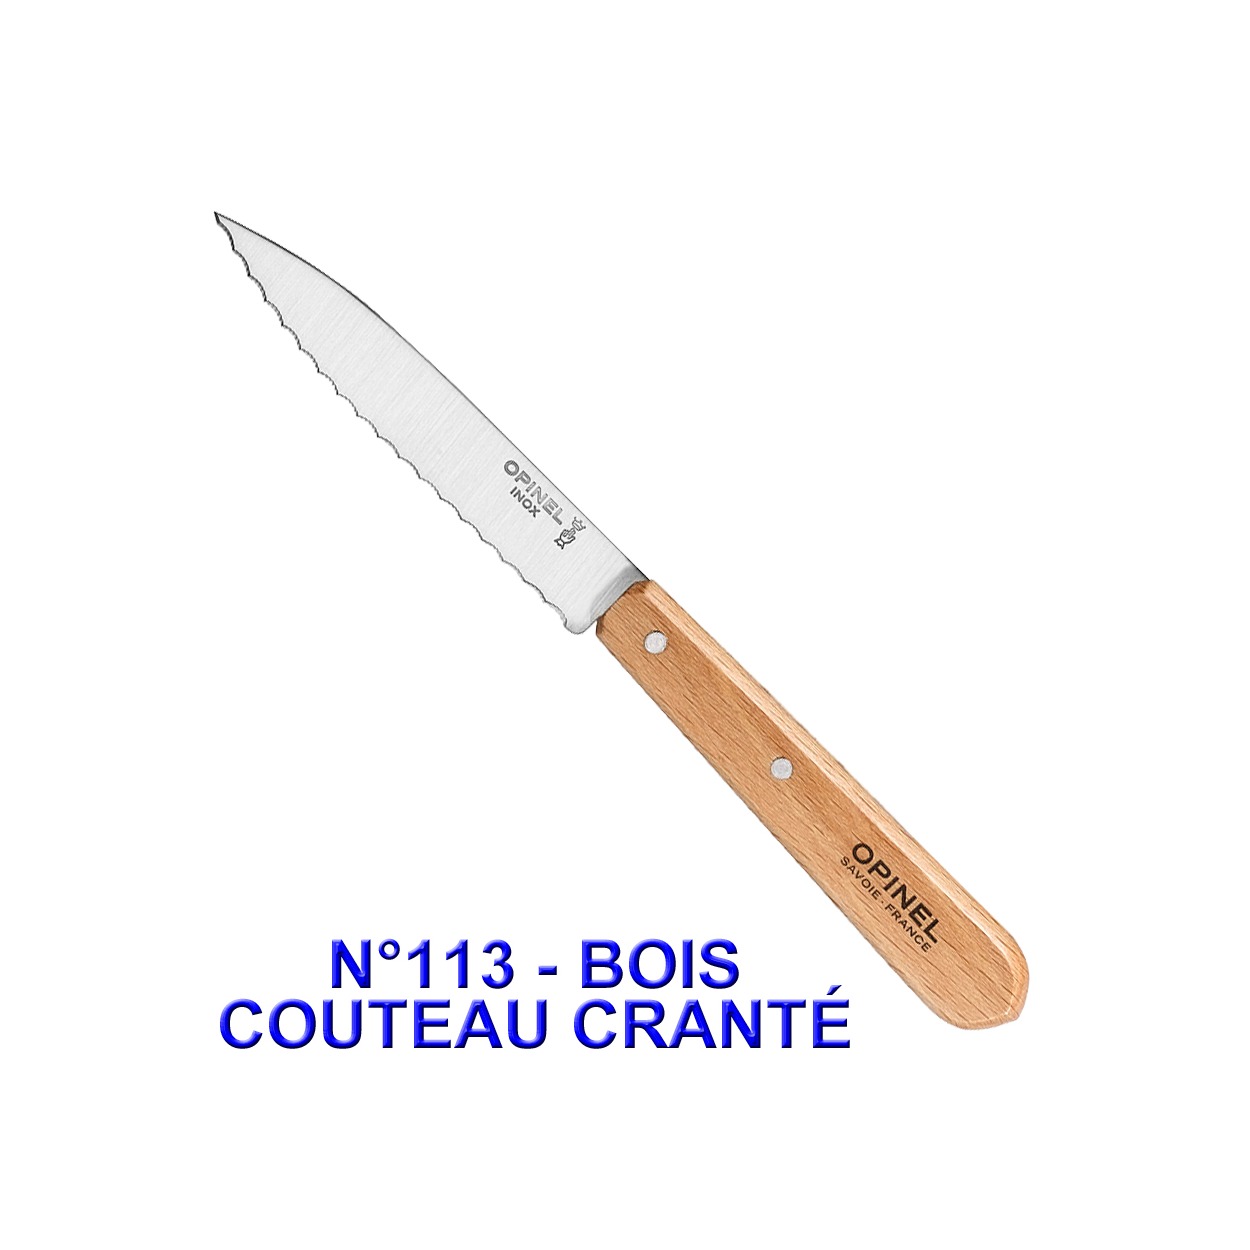 1 COUTEAU OFFICE CRANTE OPINEL N 113 VERT POMME LAME 10 CM INOX